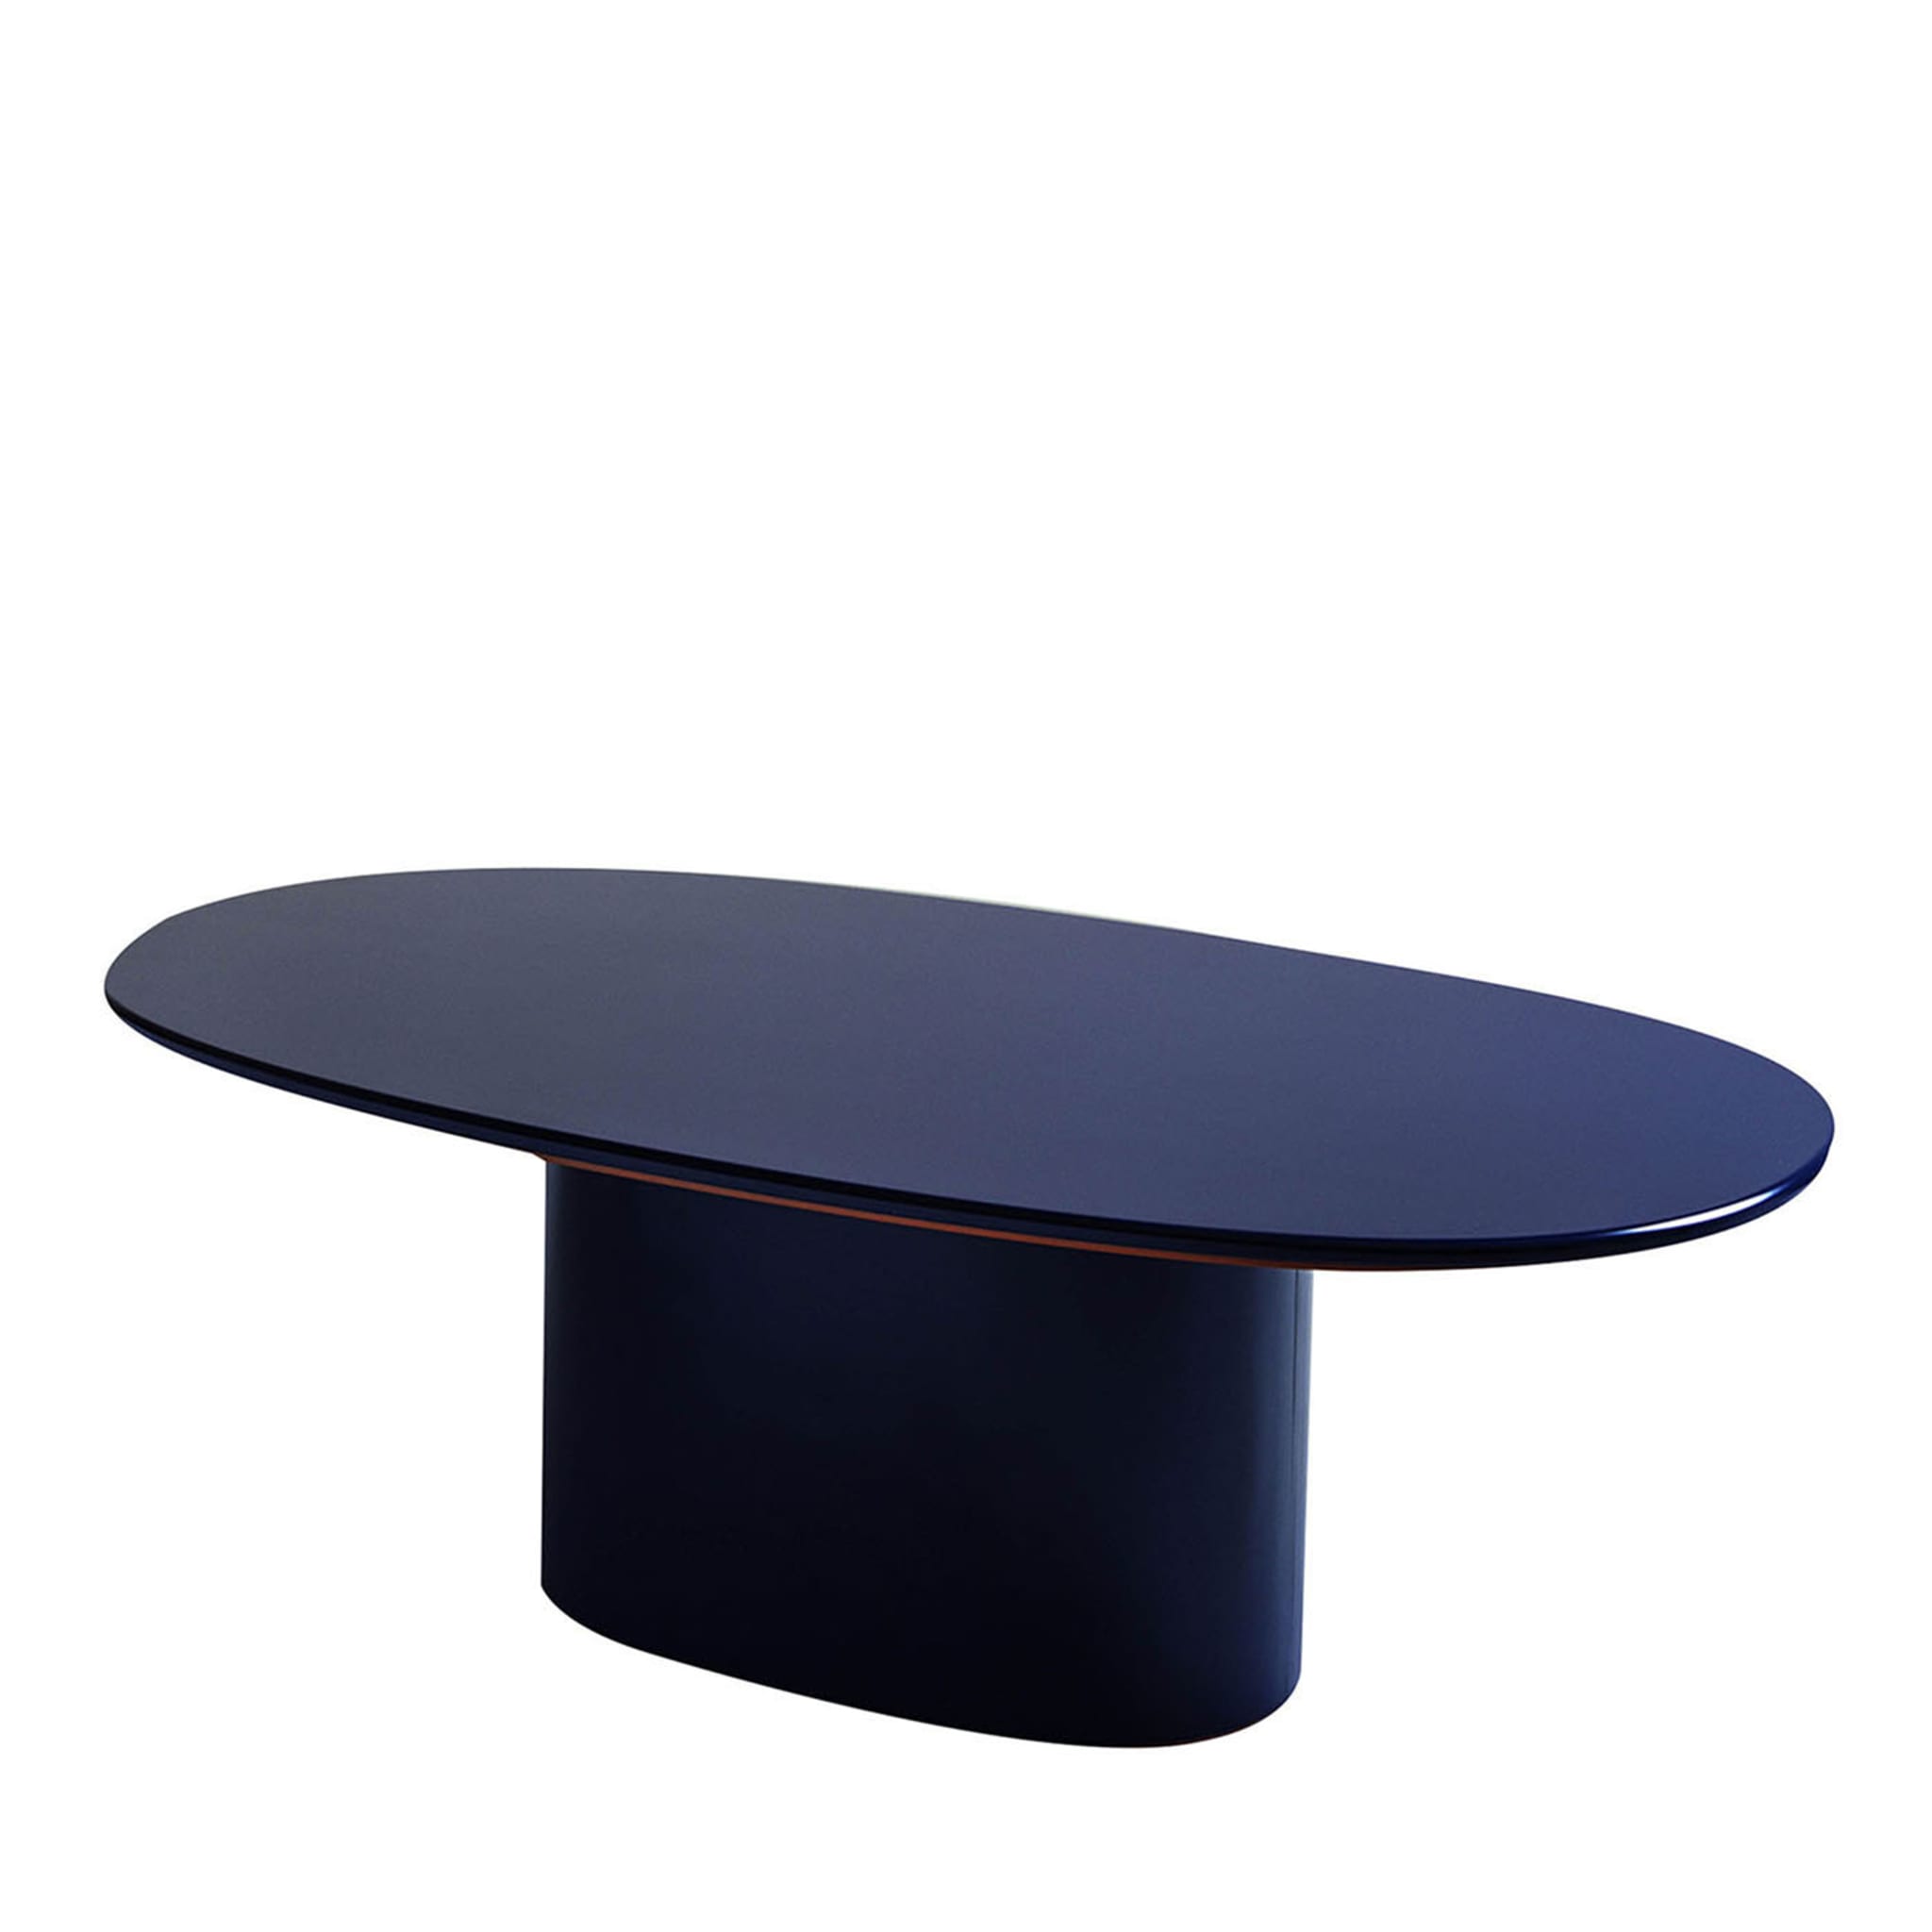 Oku Oval Blue Dining Table by Federica Biasi - Main view